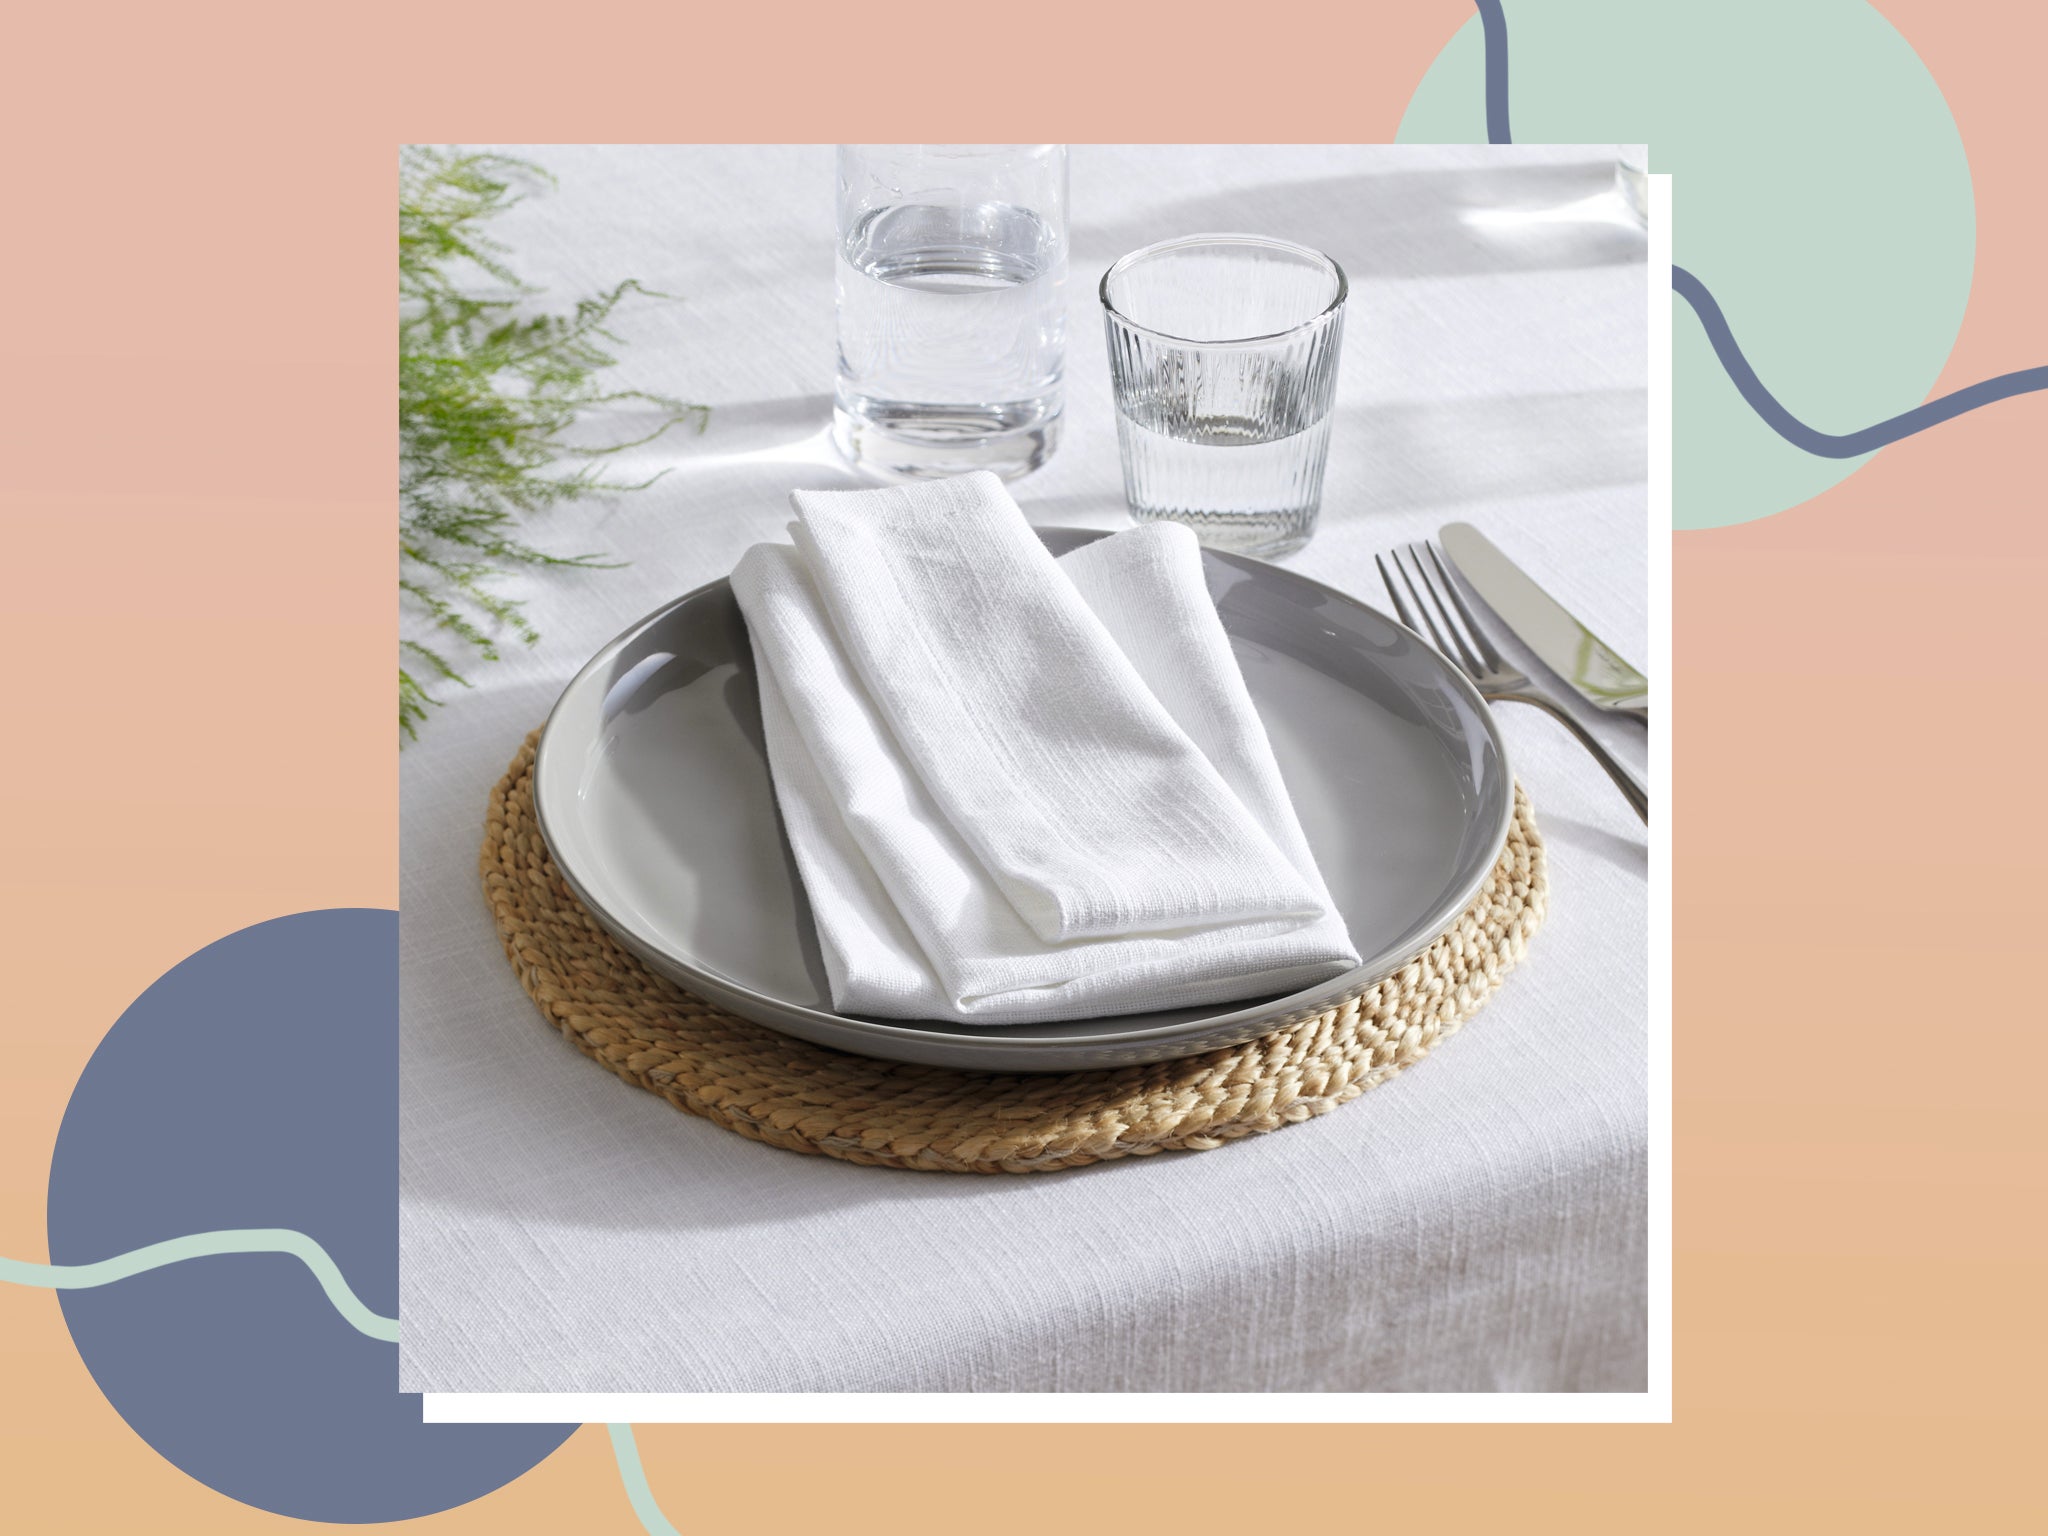 Umi By  Cloth Dinner Napkin 45x45 cm Pack of 12 Ultra-Luxurious Soft and Premium Cotton Hotel Quality Napkins Perfect for Events Hotel and Home-use Color-Navy